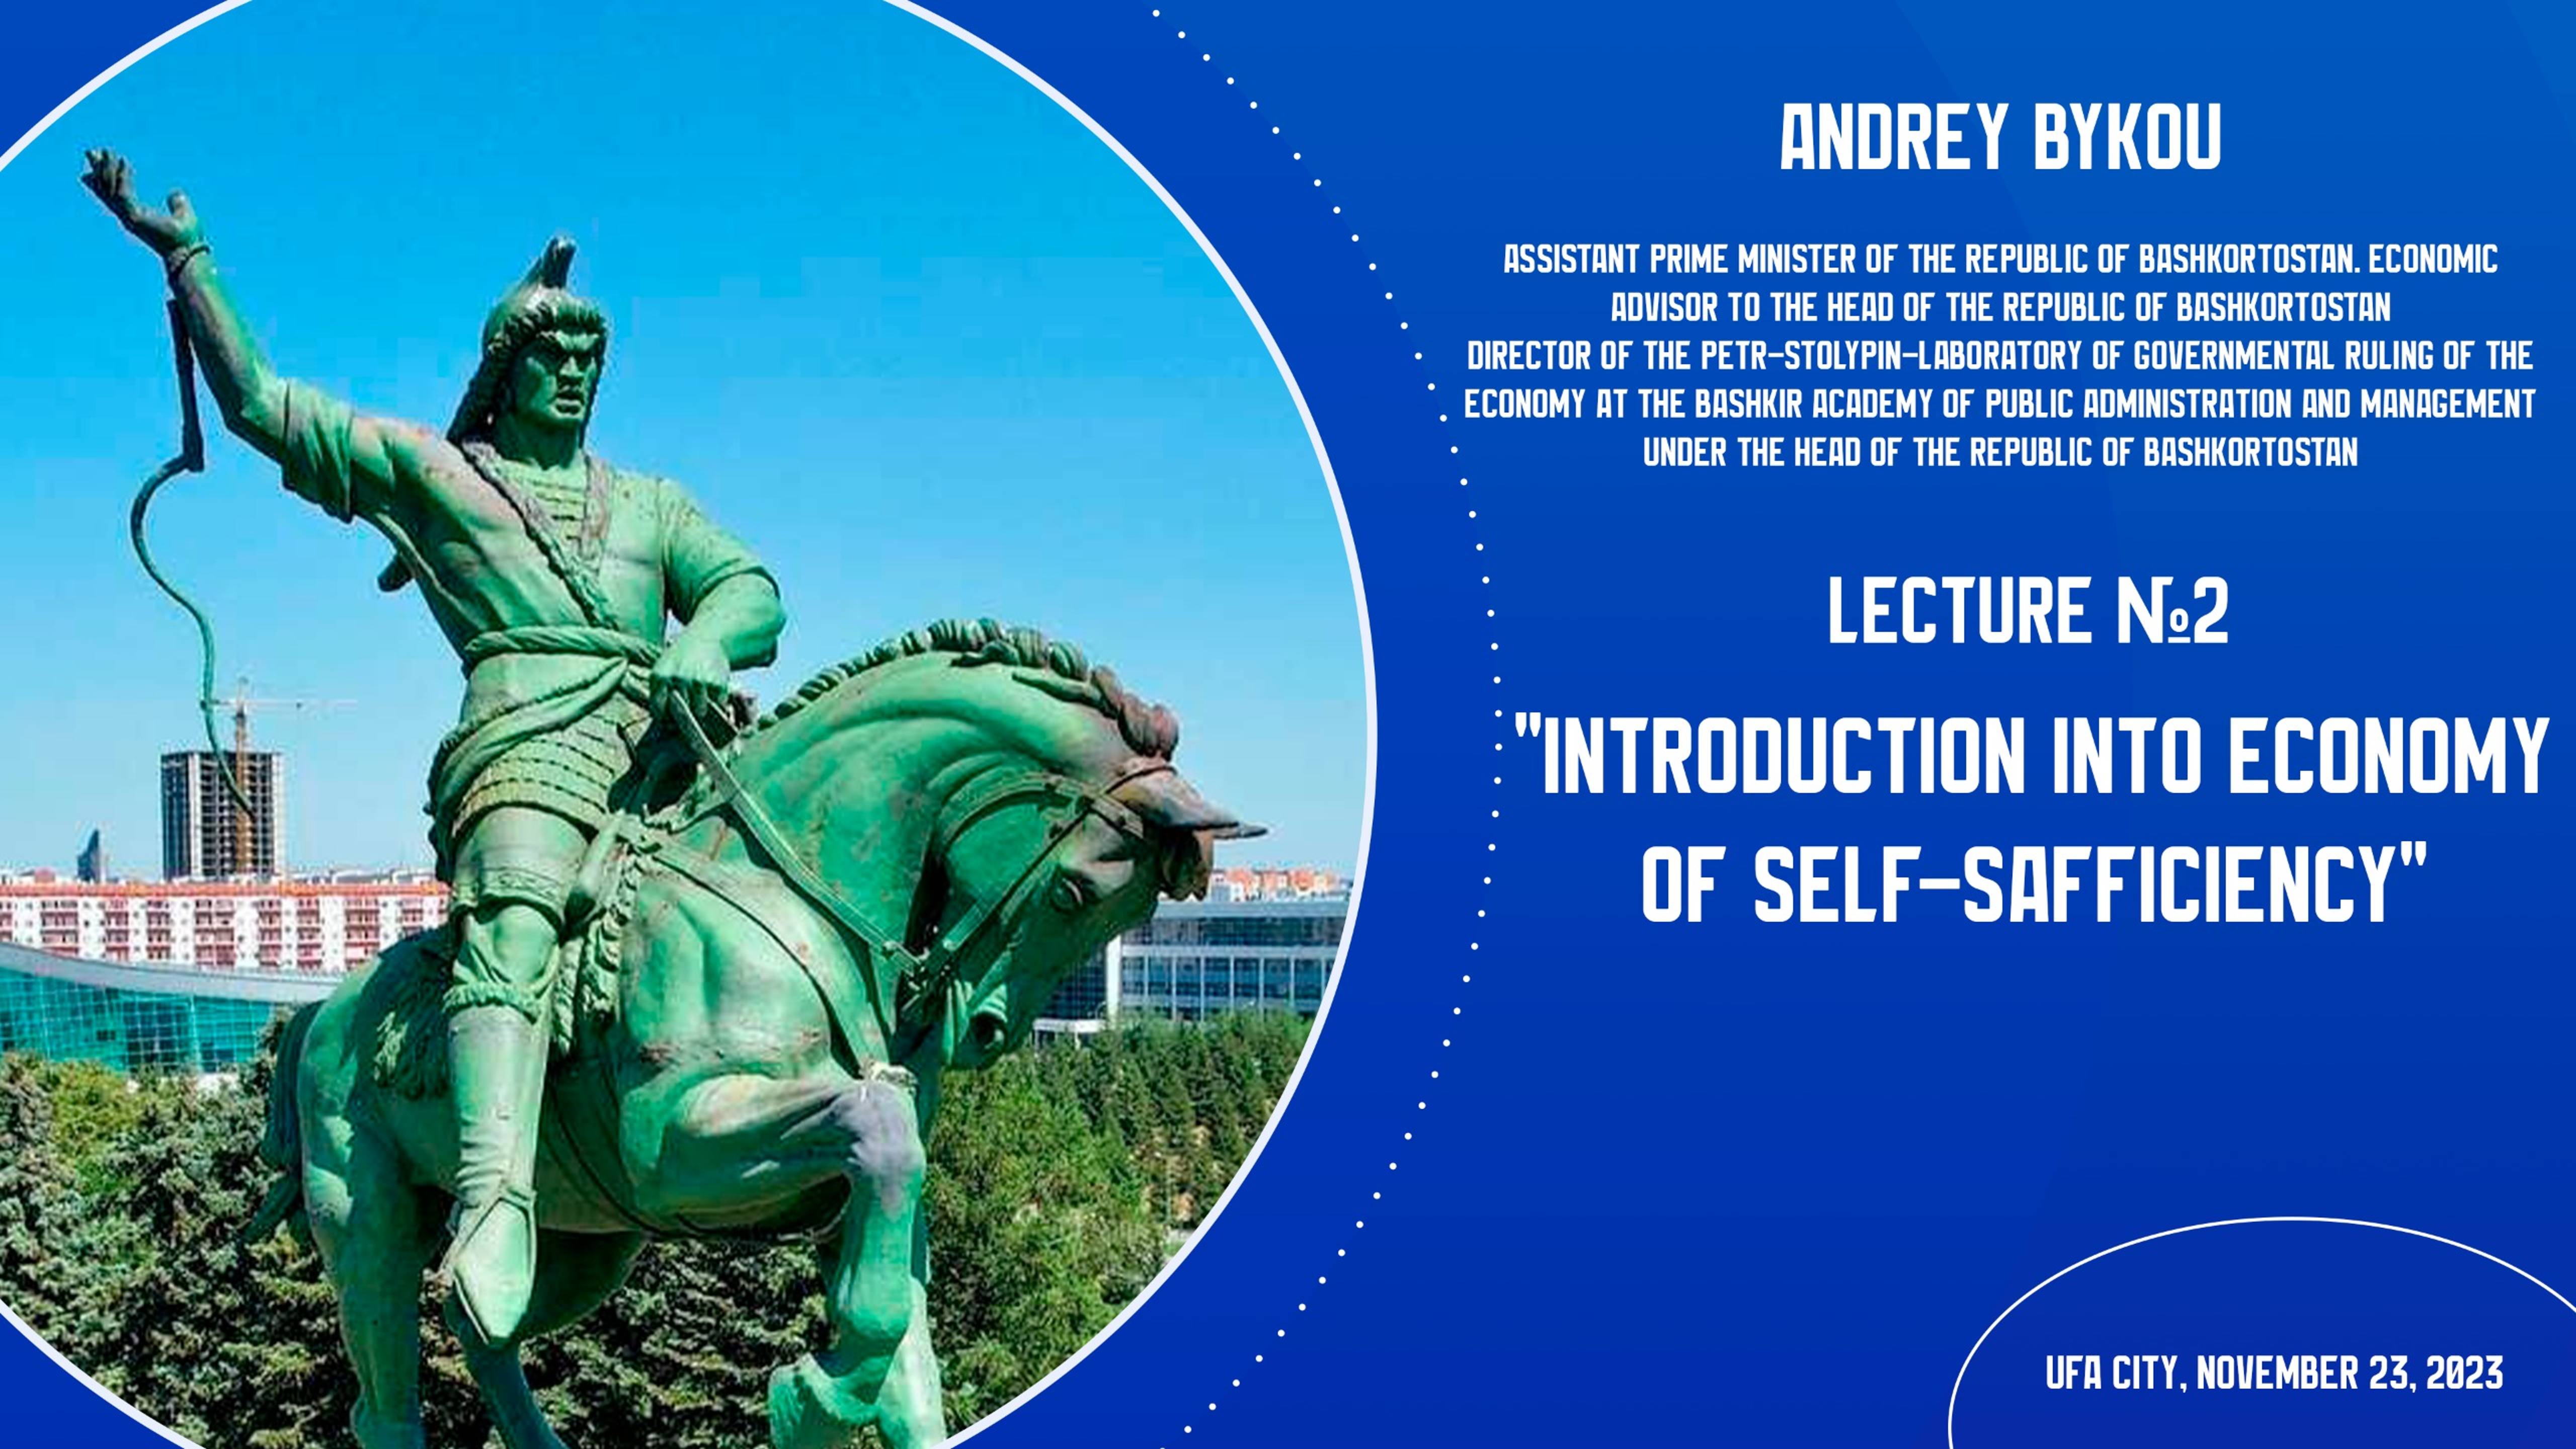 Andrey Bykov. Lecture N2 "Introduction into Economy of Self-Safficiency"